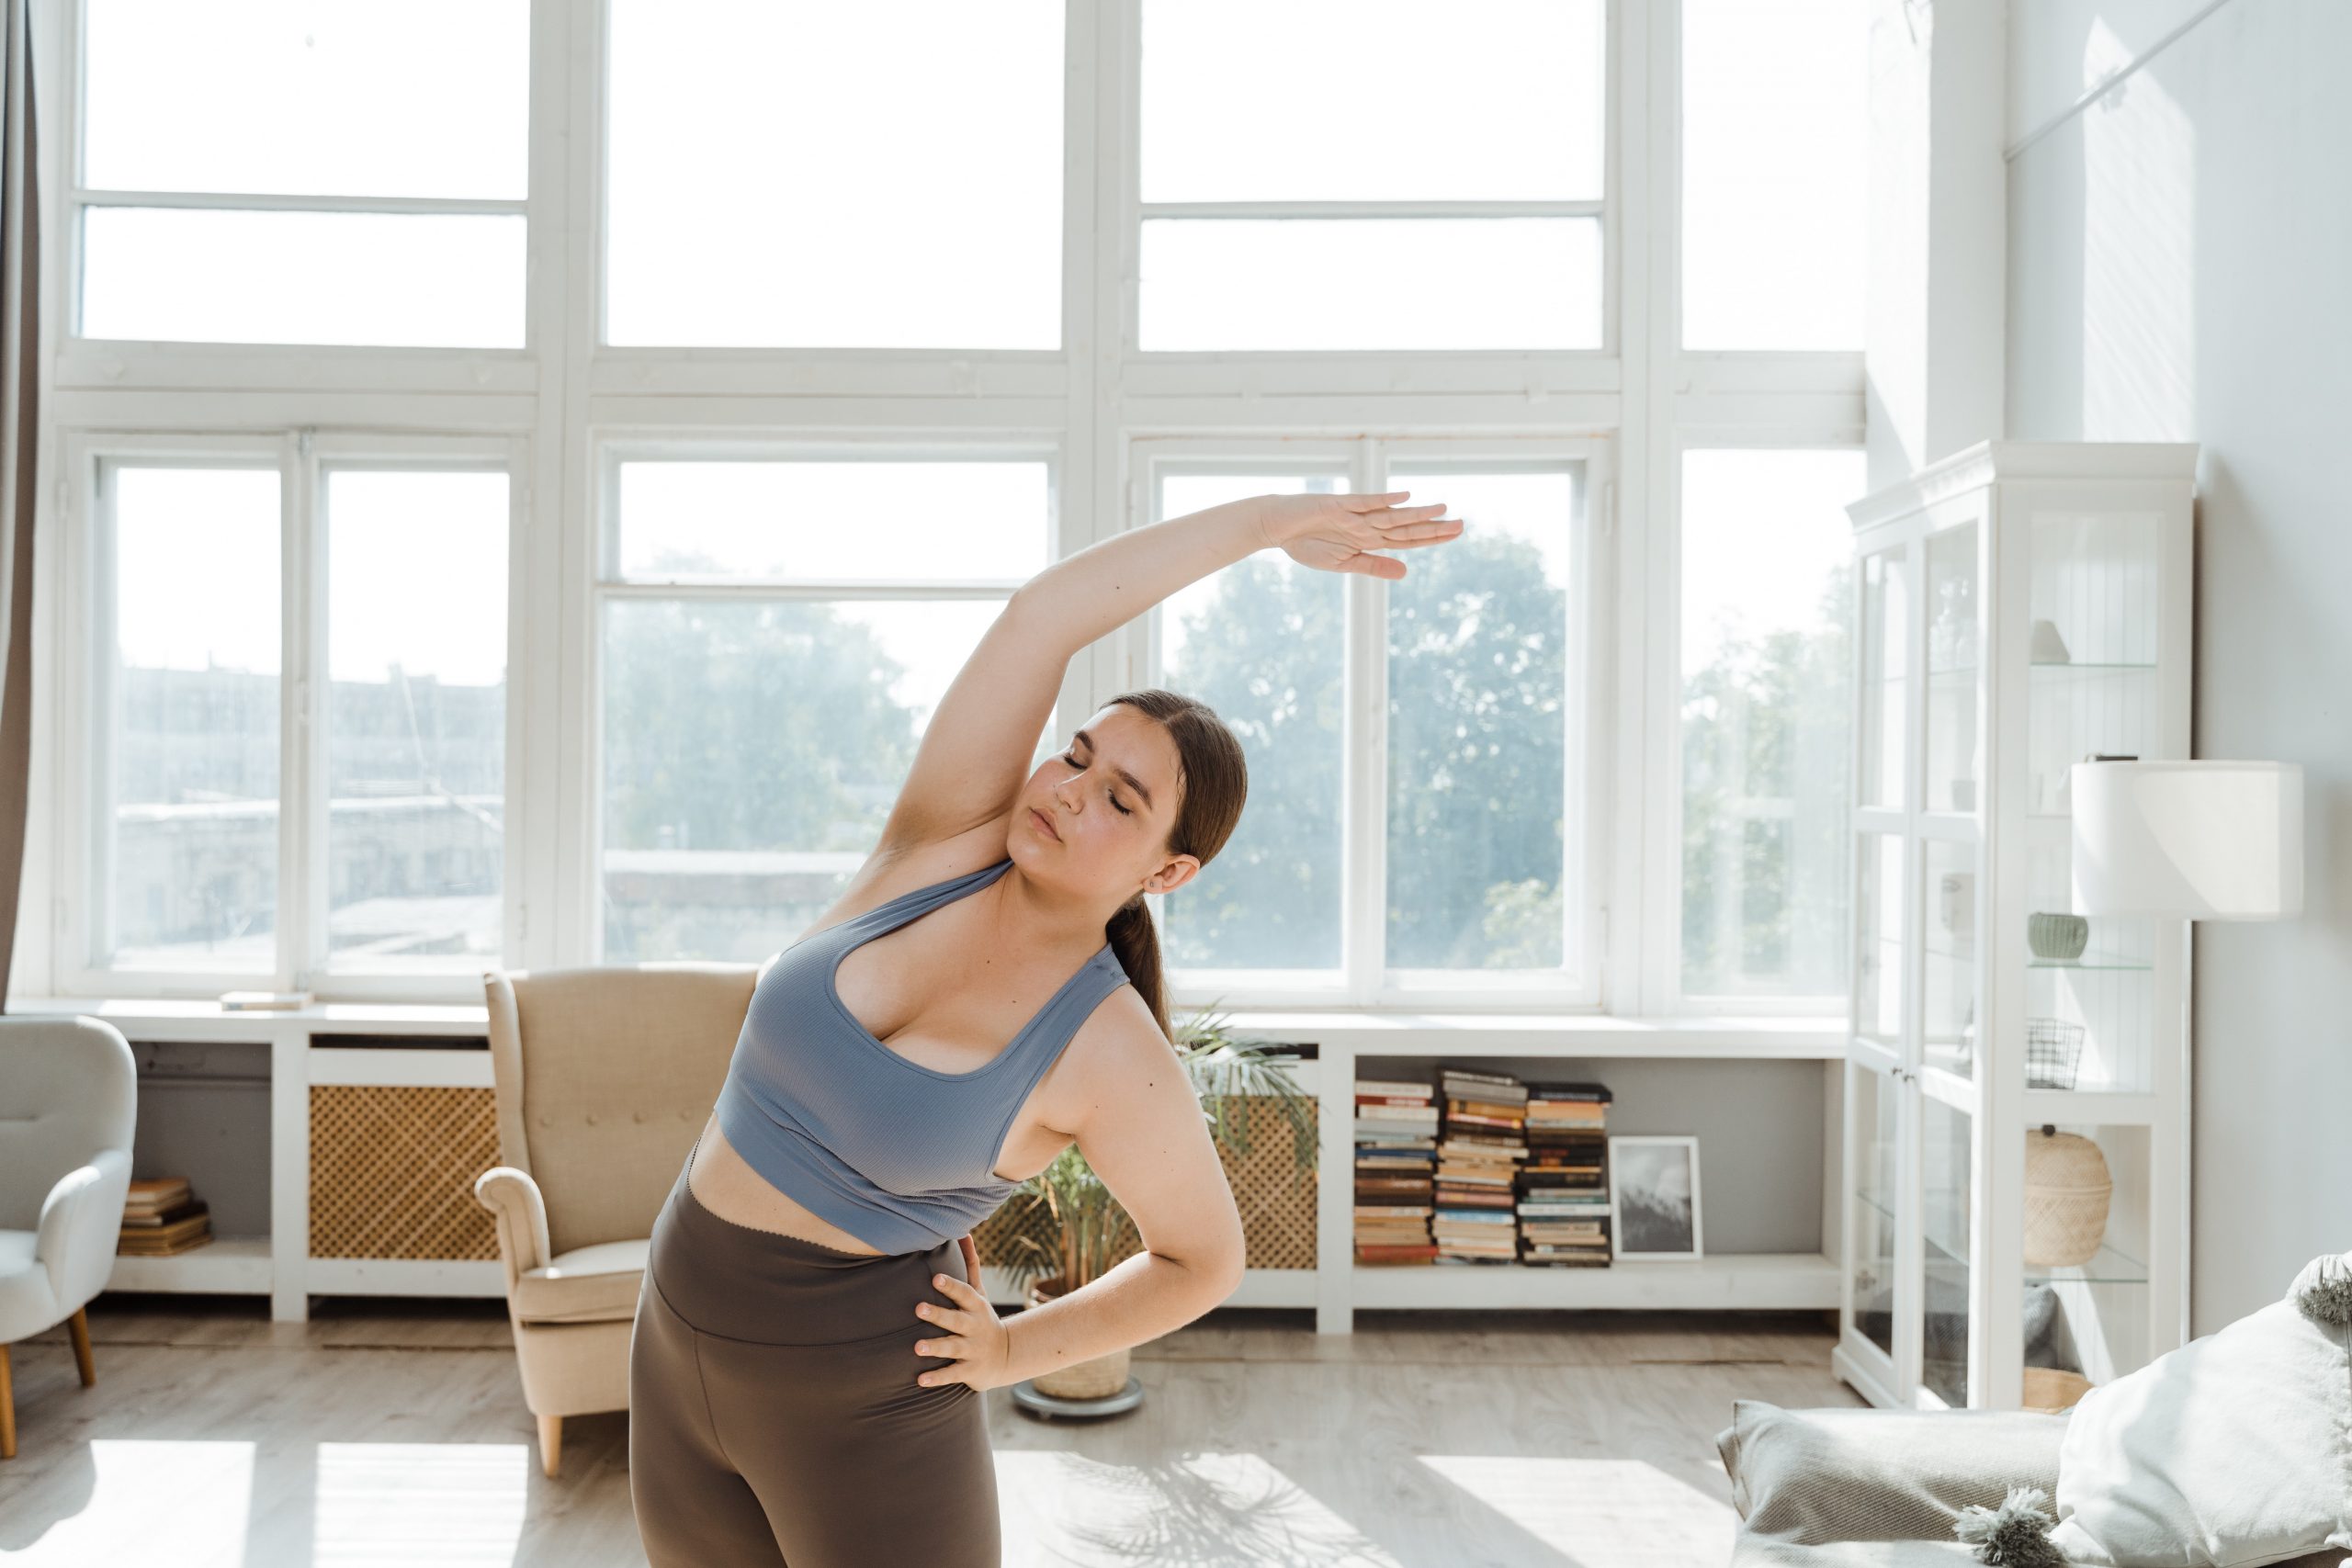 A young overweight woman practises yoga from home with light flooding from the windows behind her.